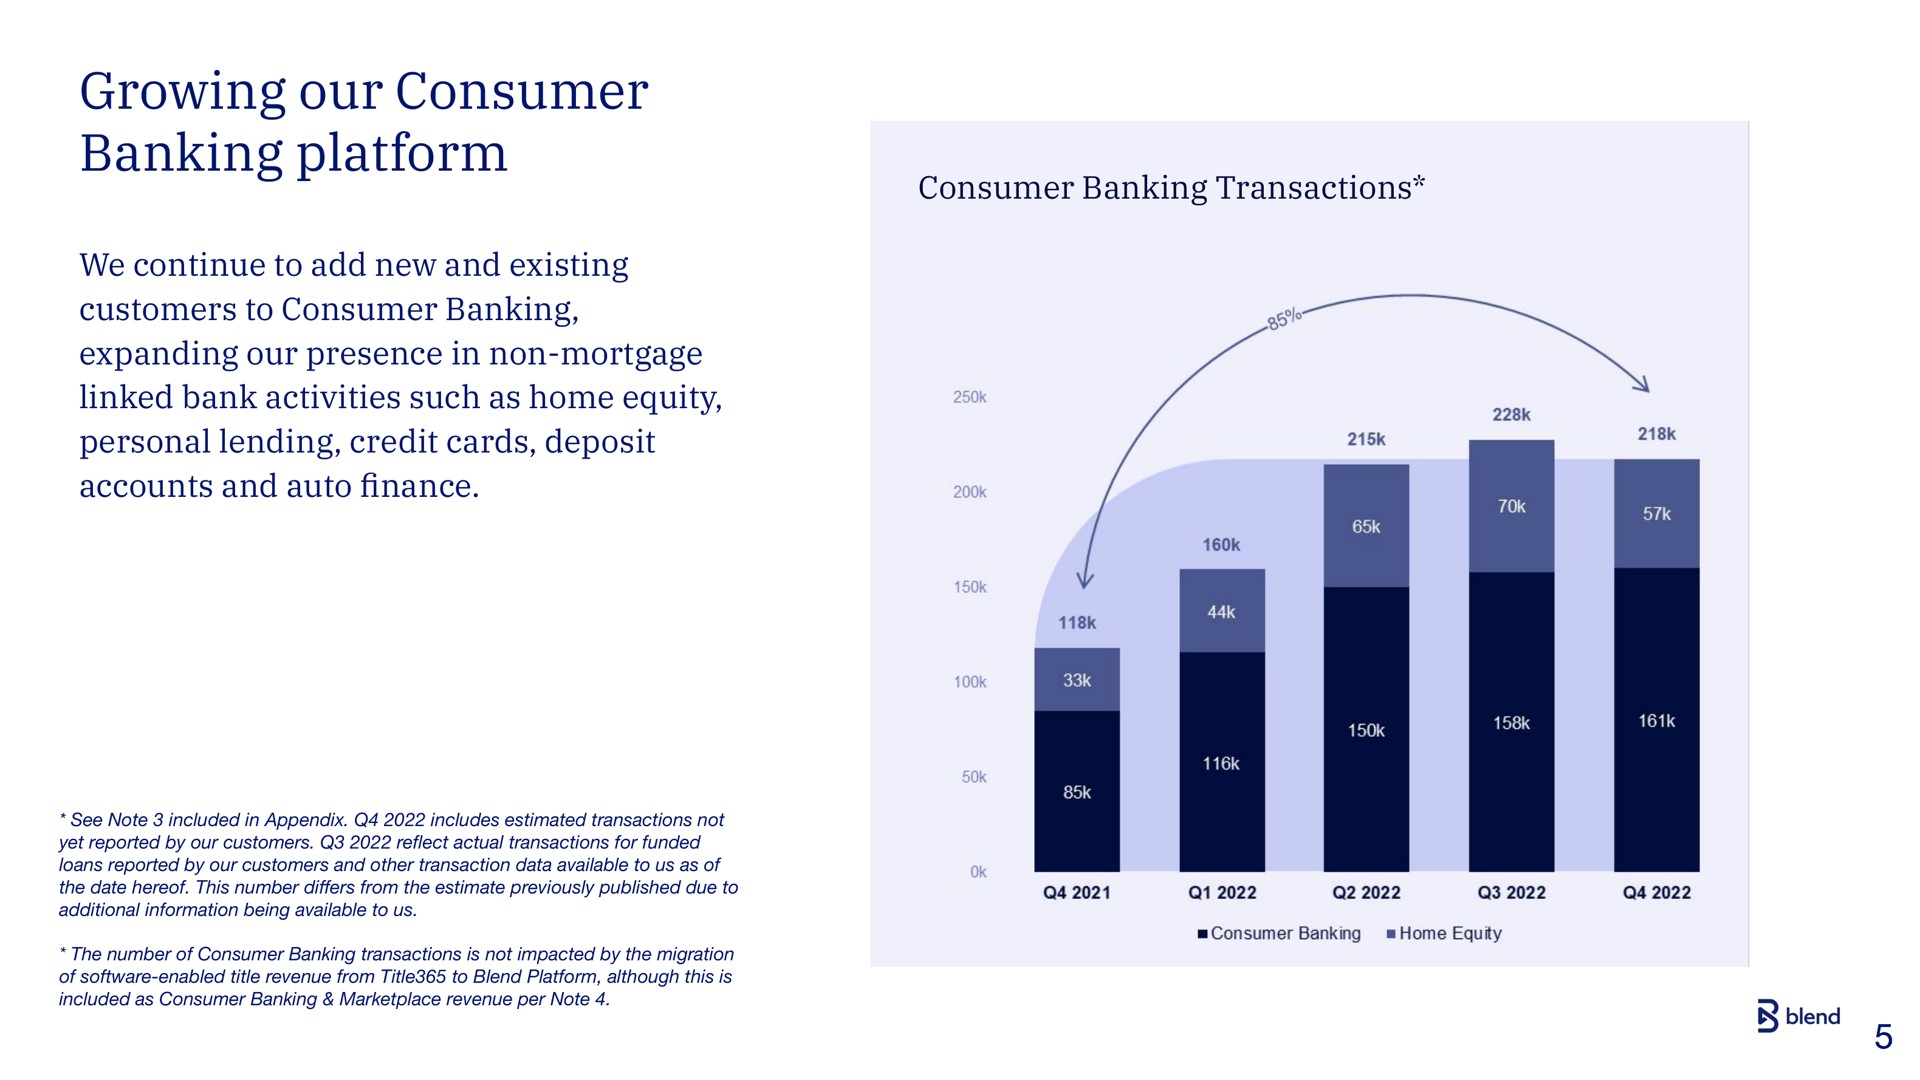 consumer banking transactions growing our consumer banking platform we continue to add new and existing customers to consumer banking expanding our presence in non mortgage linked bank activities such as home equity personal lending credit cards deposit accounts and auto finance blend | Blend